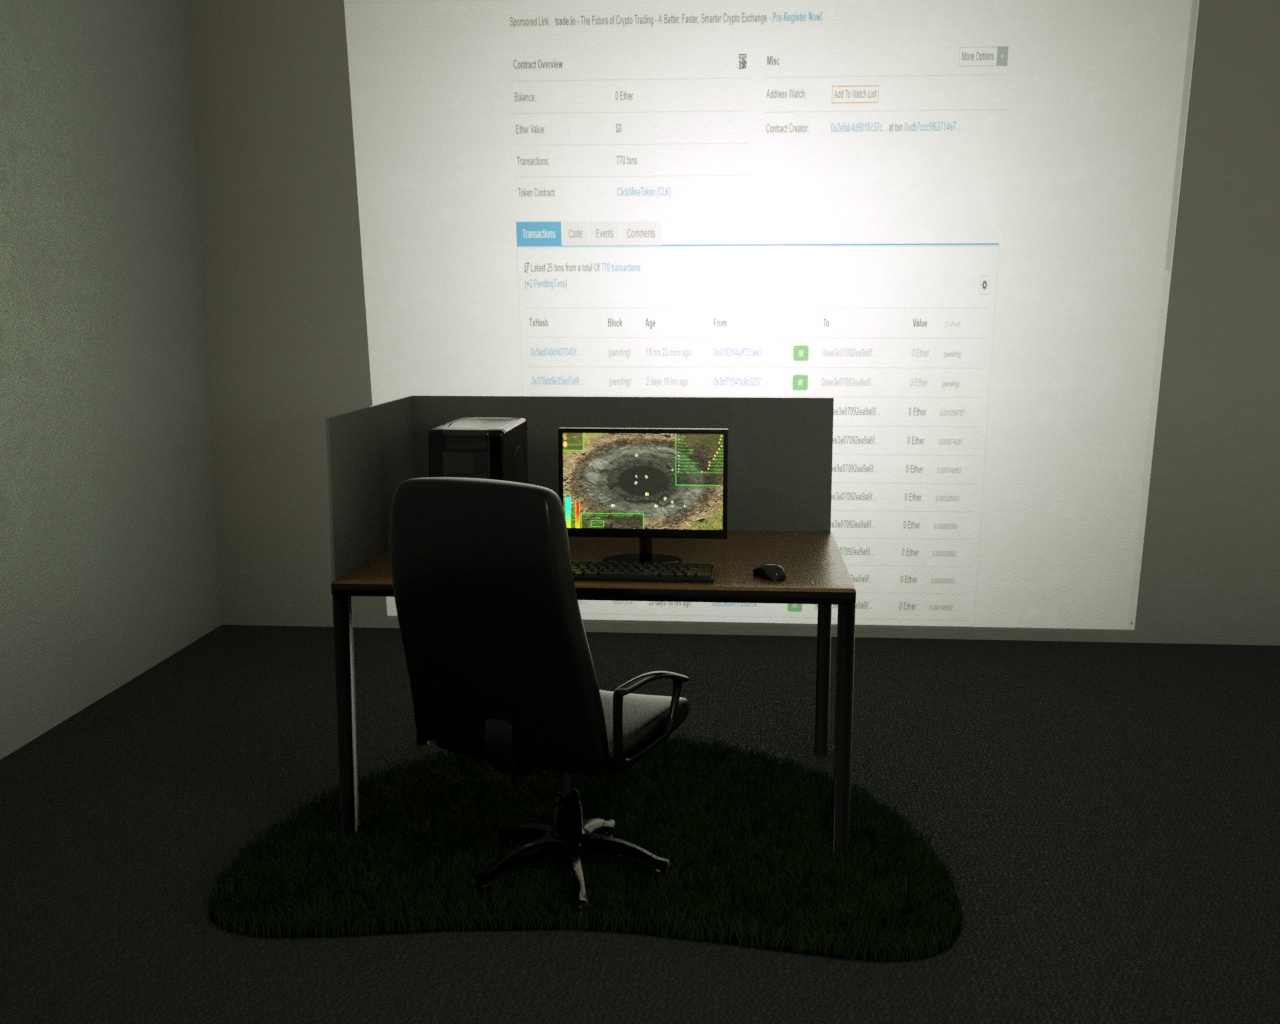 3D render of ClickMine with Etherscan projected in the background